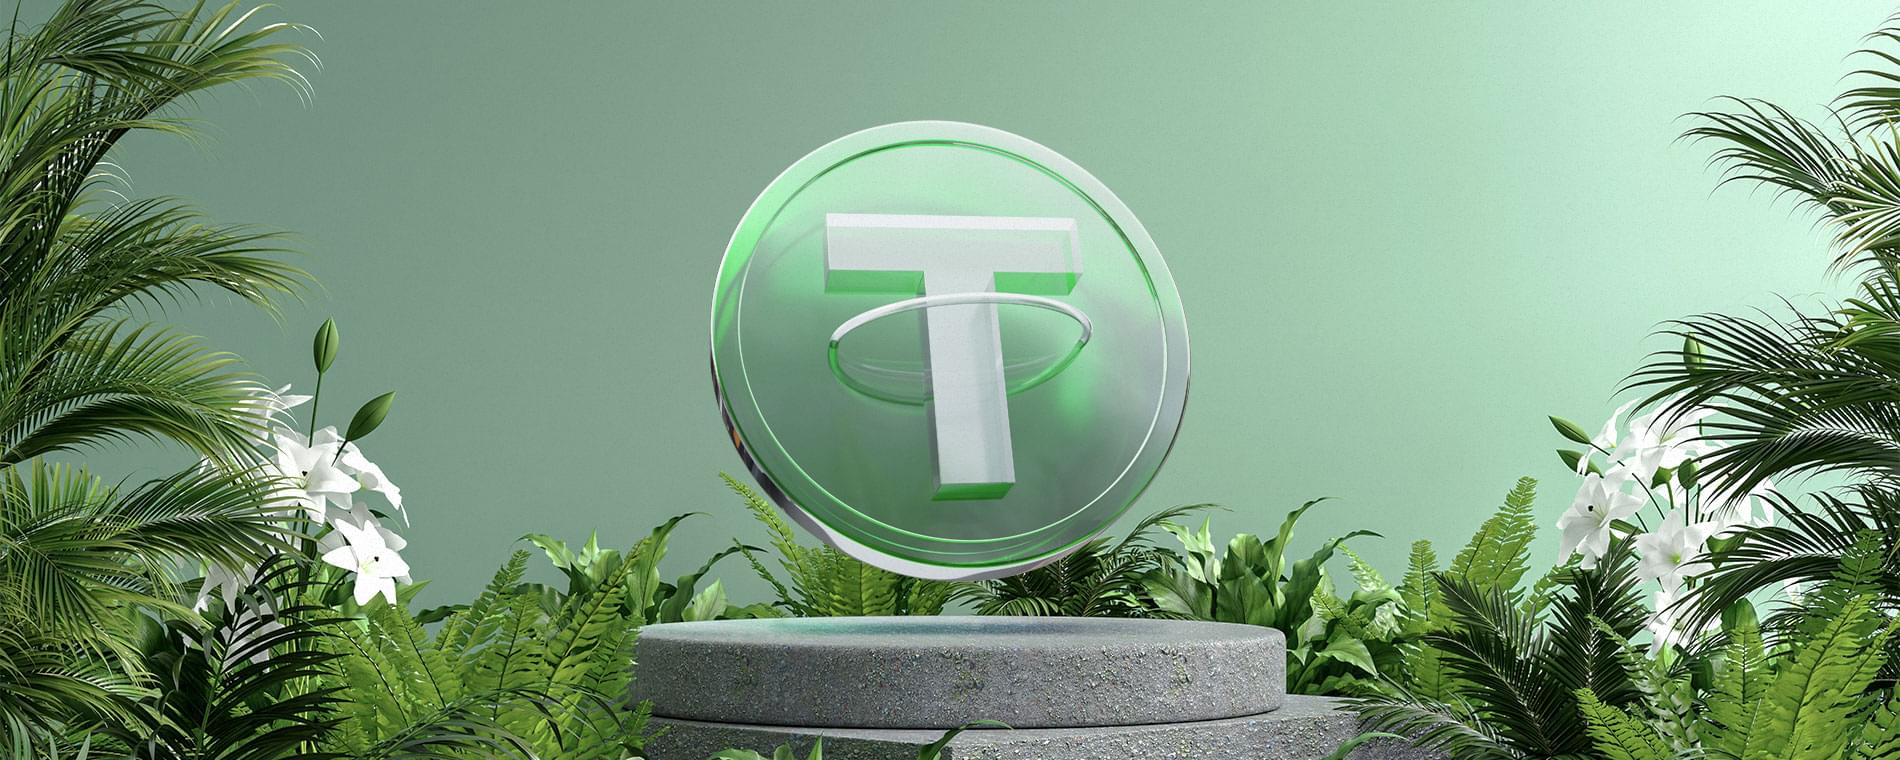 Tether launches Mexican Peso pegged stablecoin